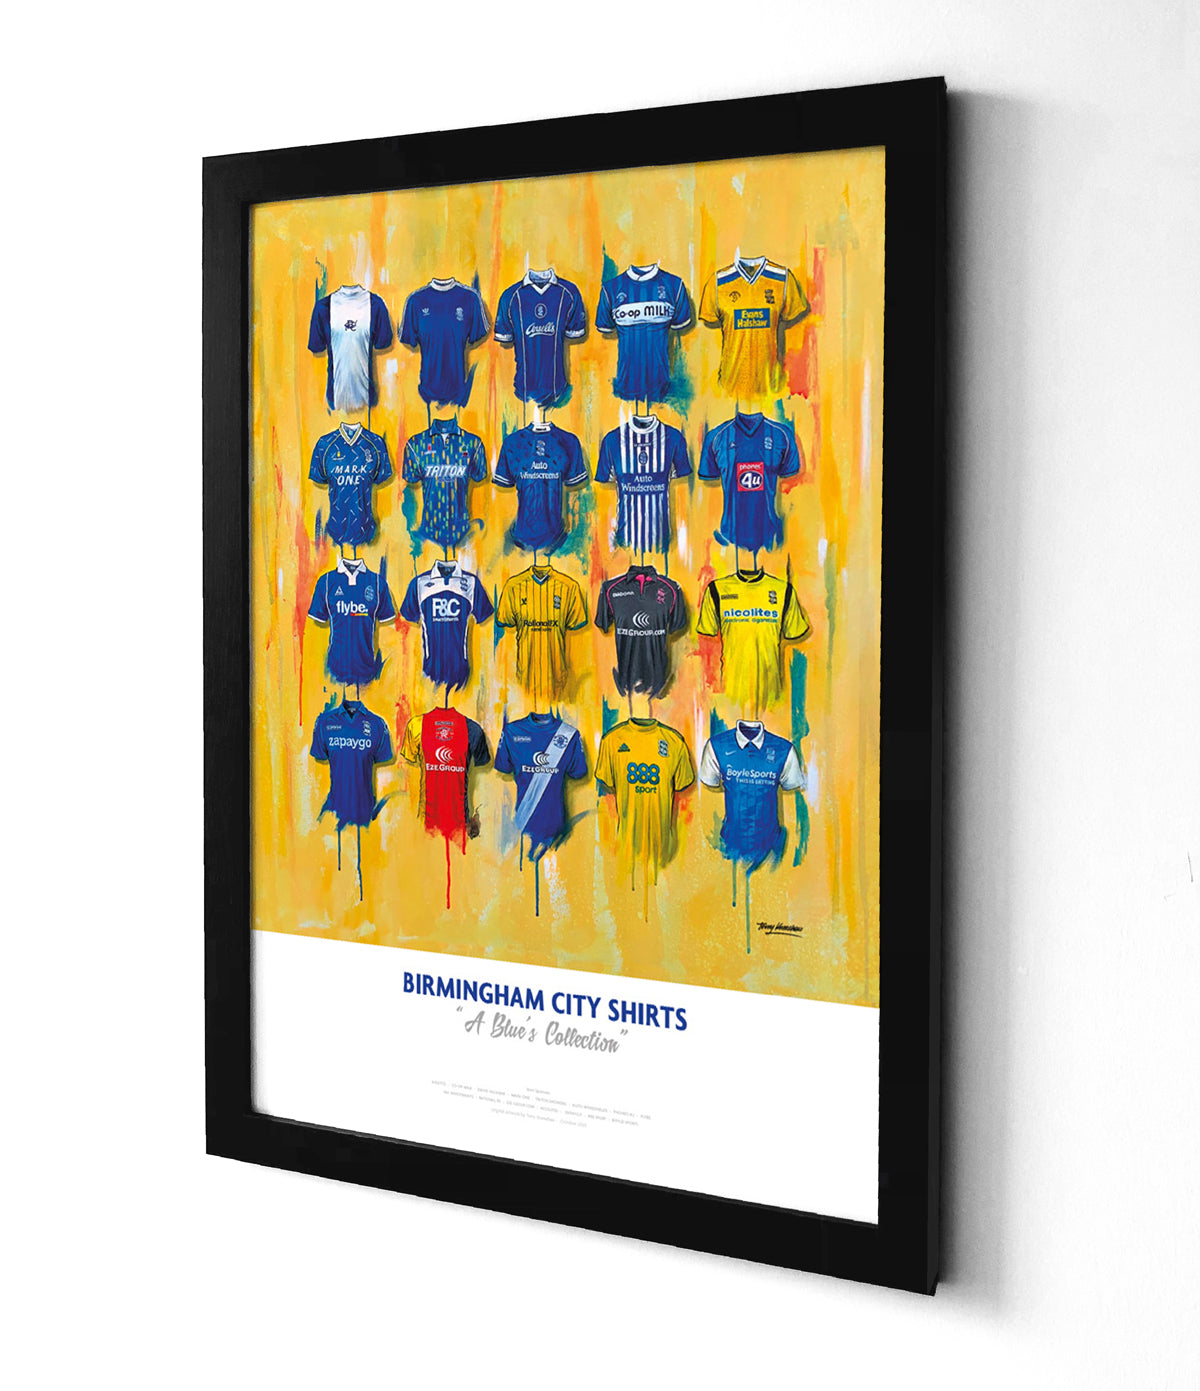 A high-quality limited edition A2 print featuring 20 iconic Birmingham City football jerseys worn by the club's legends throughout their history. The kits are mainly blue or white, with blue accents and feature the Birmingham City crest, kit manufacturer, and shirt sponsor logos on the front. The artwork is a high-quality print of a hand-painted original, which uses textured brushstrokes to create a dynamic effect.